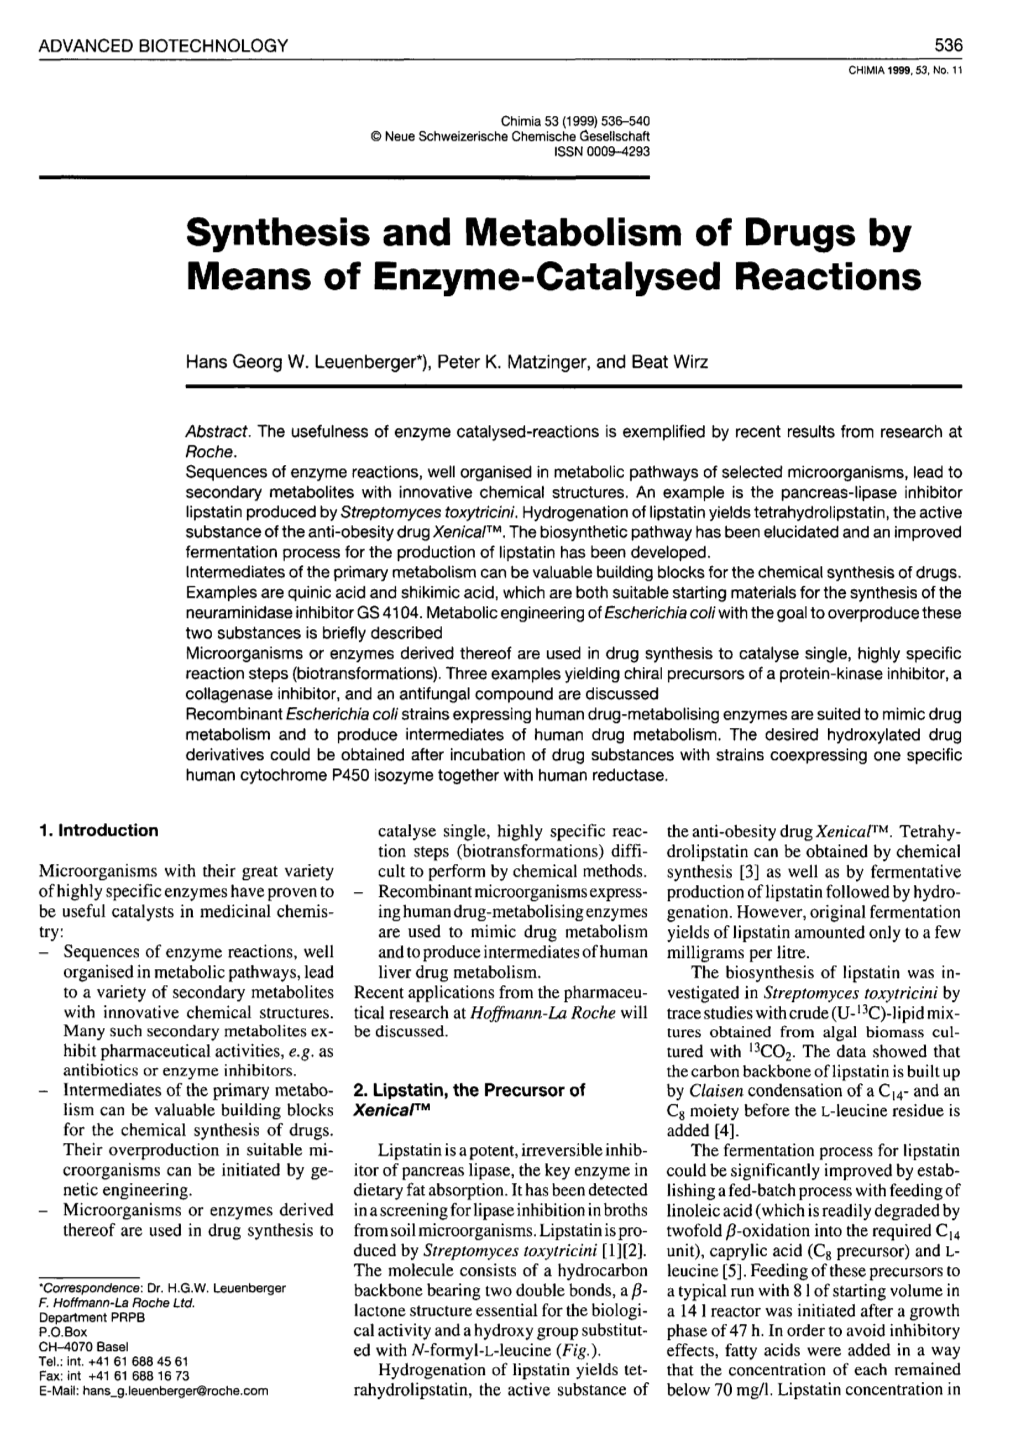 Synthesis and Metabolism of Drugs by Means of Enzyme-Catalysed Reactions